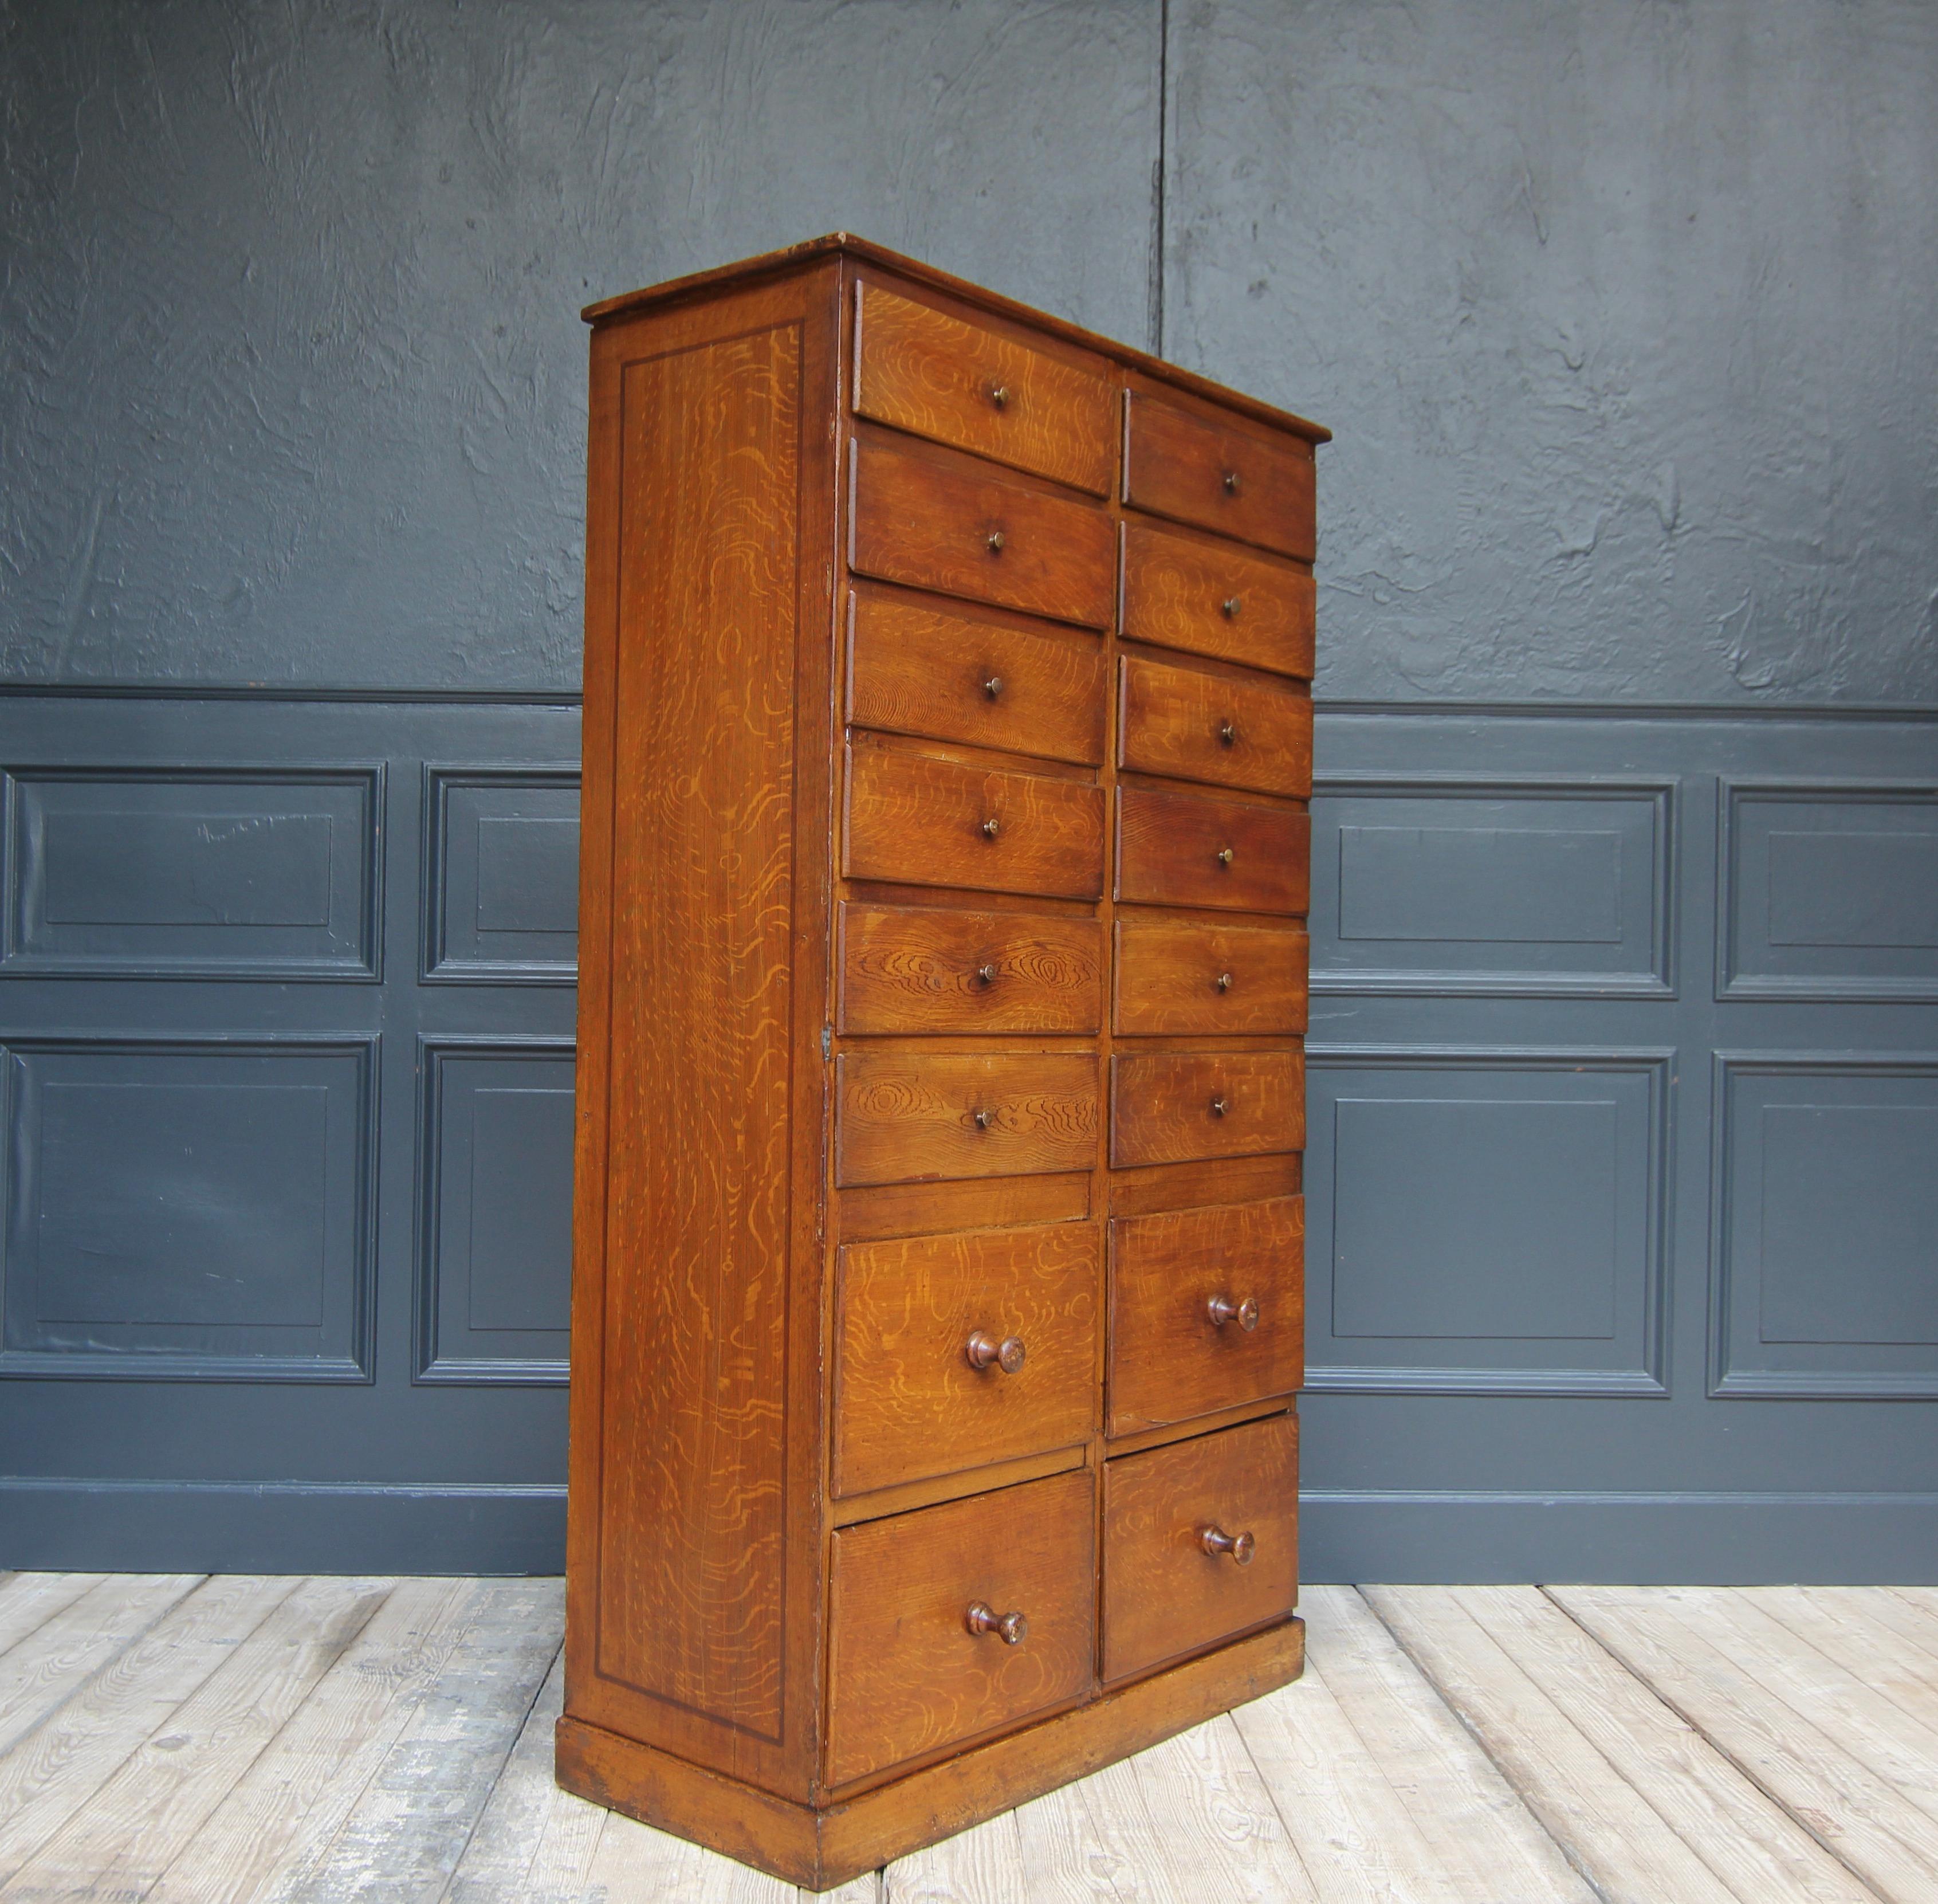 Painted Early 20th Century Industrial Wabi Sabi High Chest of Drawers